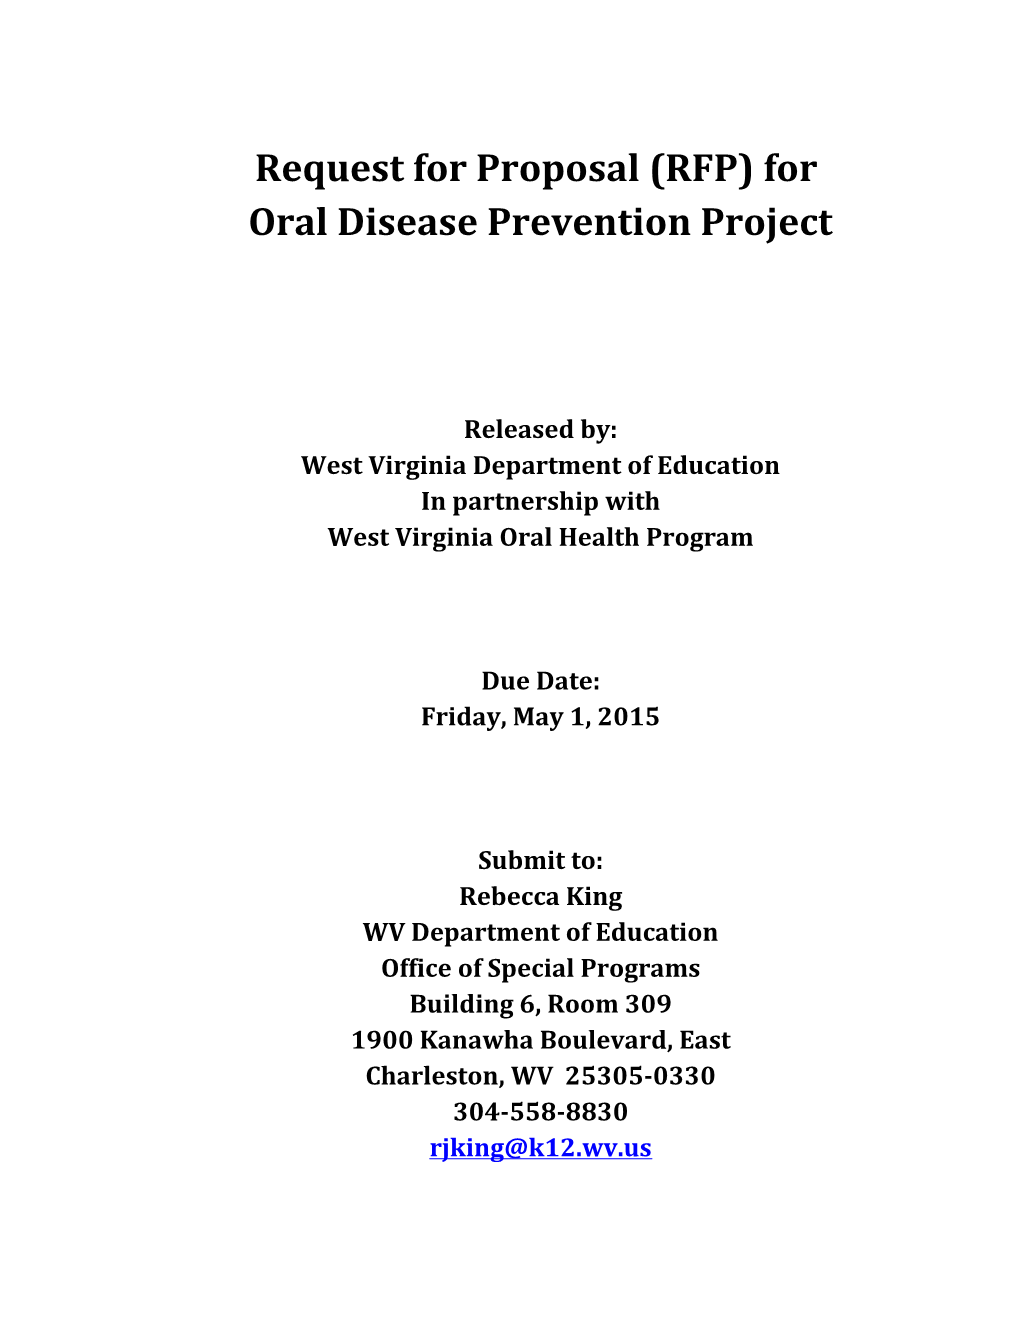 Request for Proposal (RFP) For